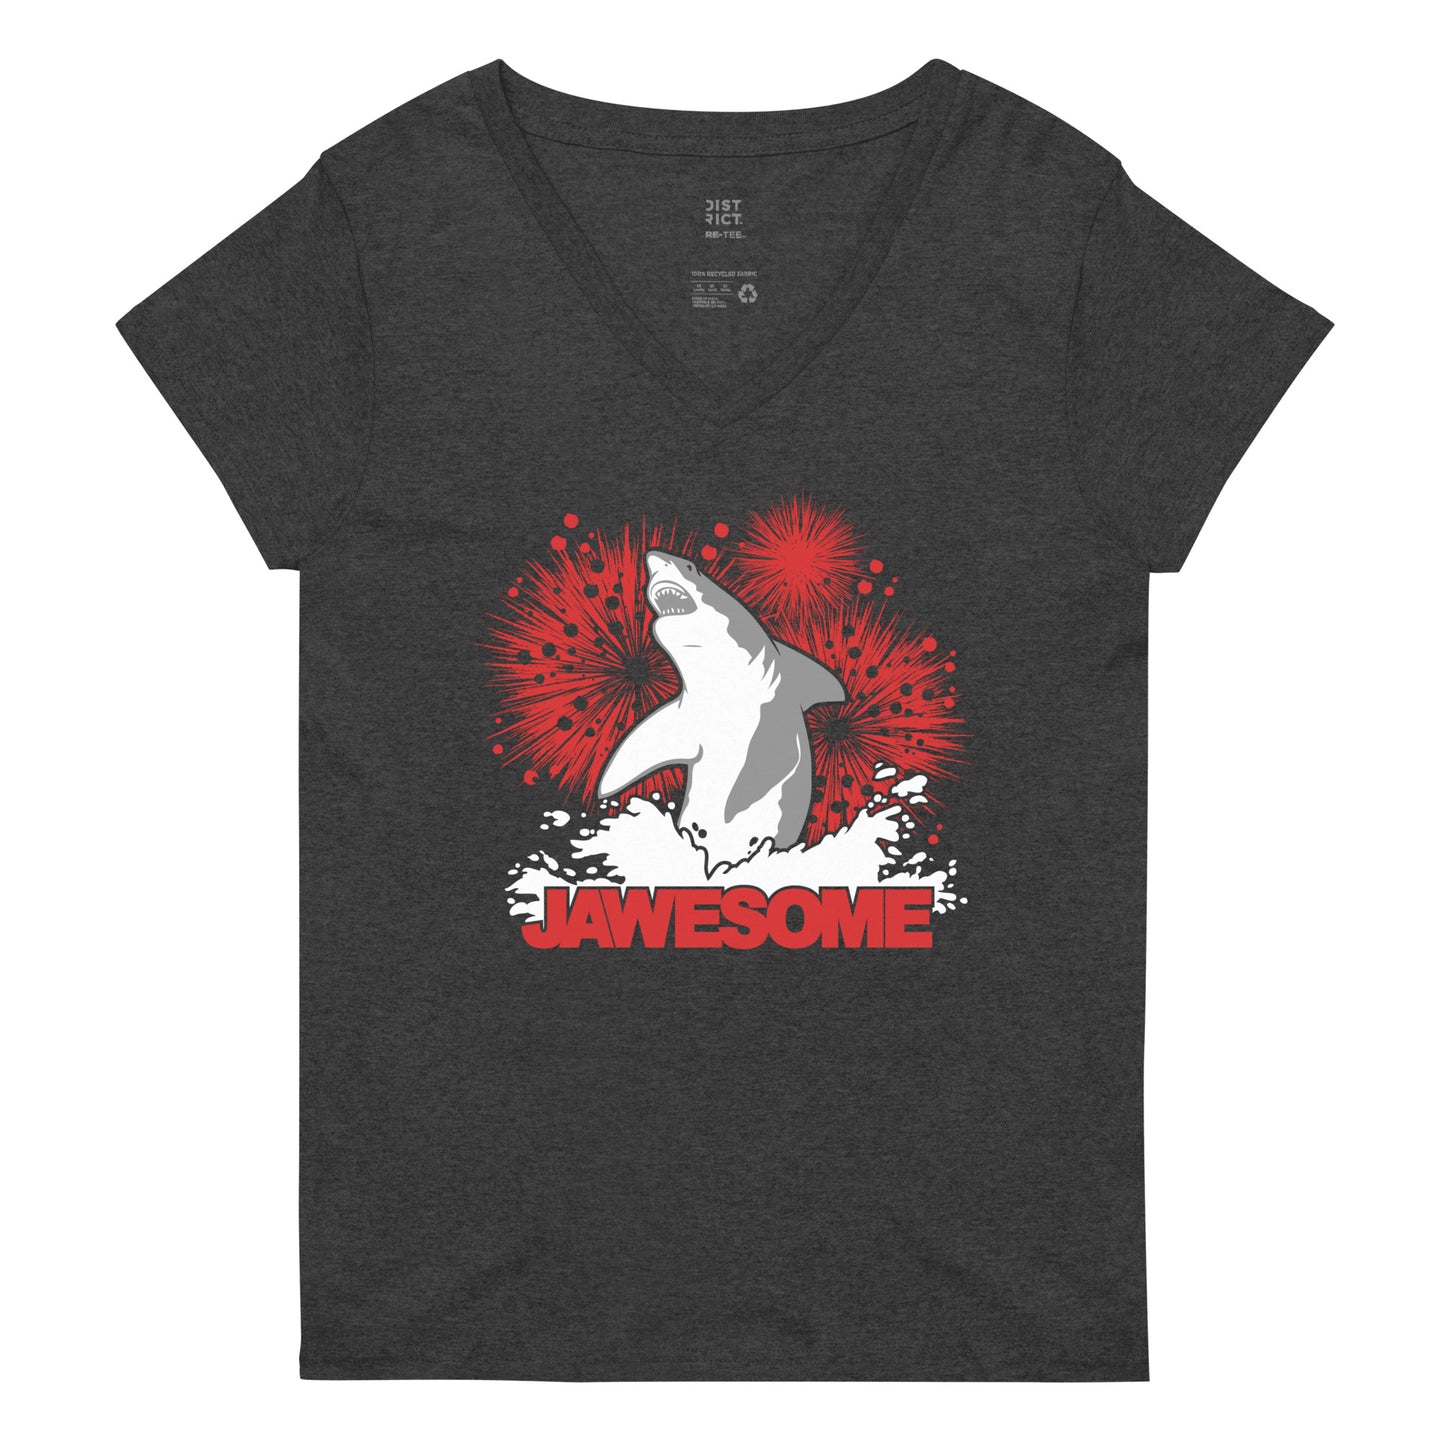 Jawesome! Women's V-Neck Tee